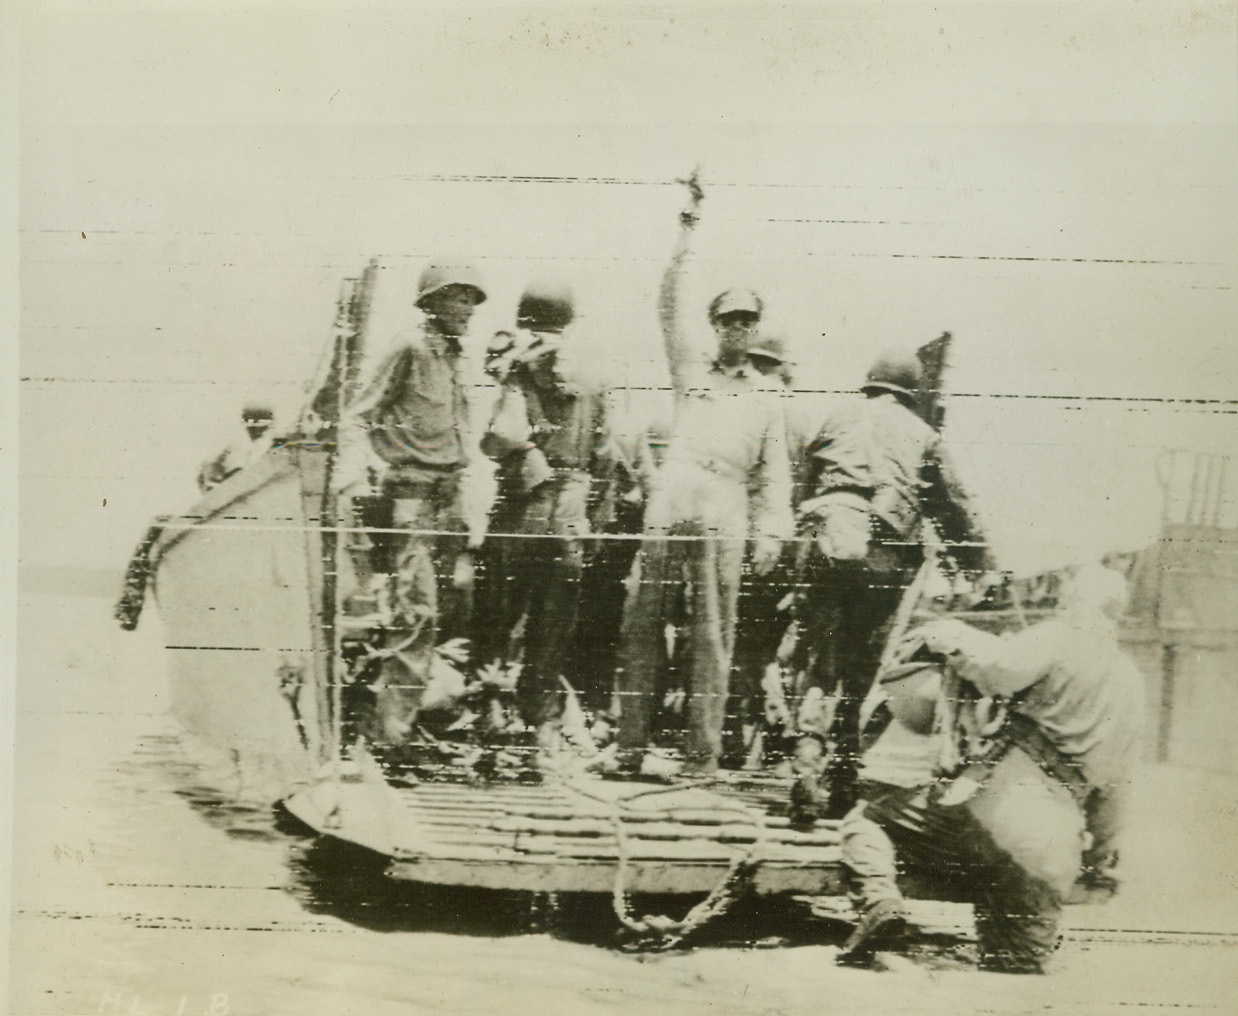 Four-Star Farewell, 9/17/1944. Moratoi Island—Waving his hand in farewell, General Douglas Macarthur leaves Moratoi Island after the successful Allied invasion of the Halmahera Group. A landing barge takes him away from the shore after his tour of the newly-established beachhead. Photo by ACME photographer Frank Prist, Jr. Credit: ACME photo via Signal Corps radiotelephoto.;